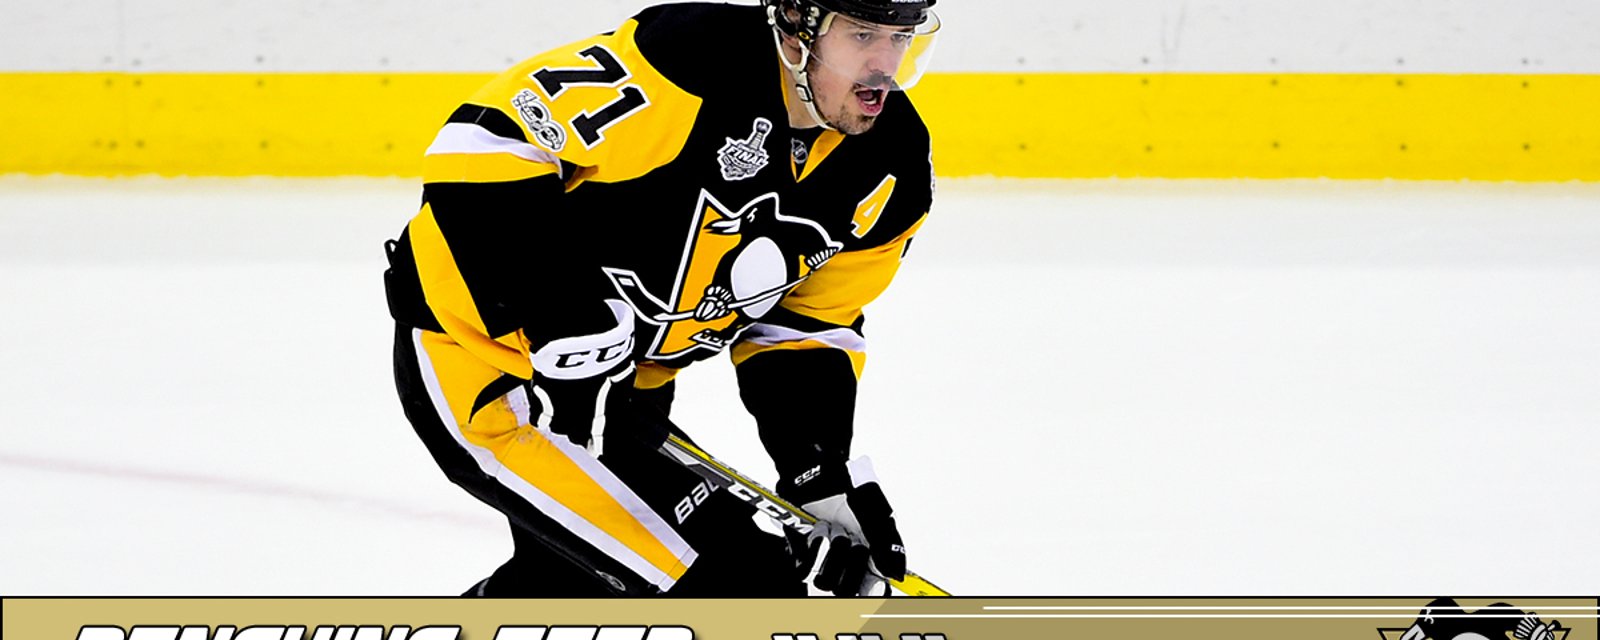 Breaking: NHL punishes Malkin for his action against the Kings!